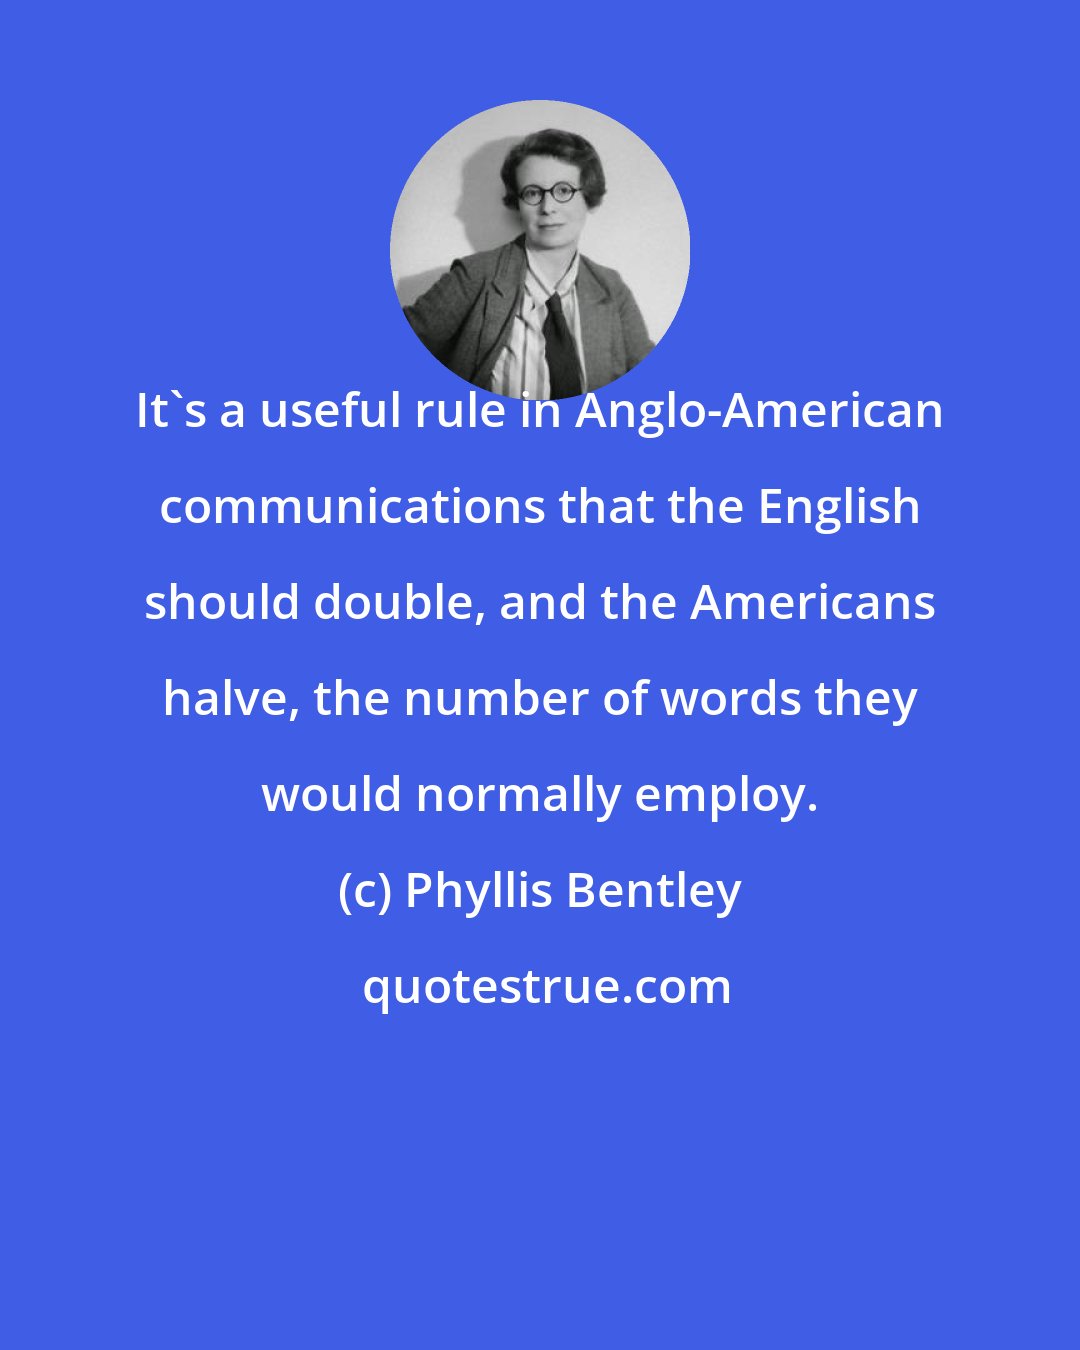 Phyllis Bentley: It's a useful rule in Anglo-American communications that the English should double, and the Americans halve, the number of words they would normally employ.